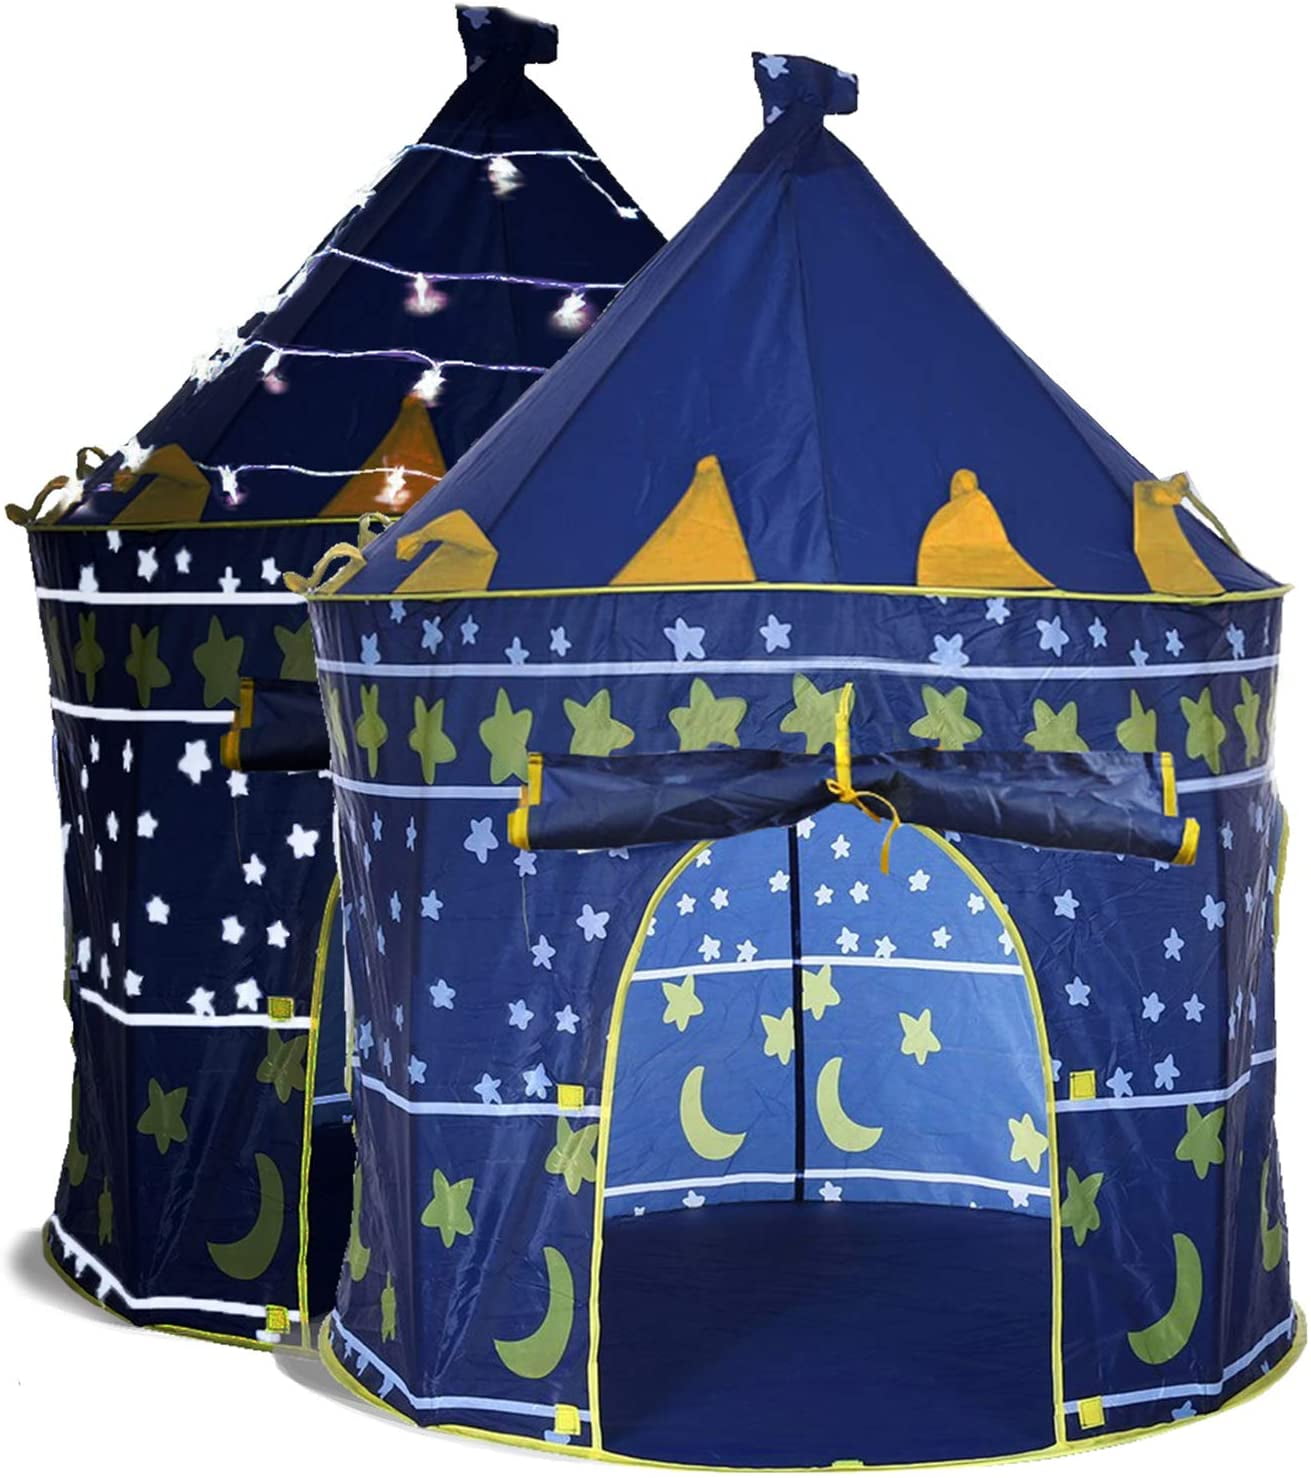 Portable Folding Fairy Play Tent Children Kids Castle Cubby Play House Toy Blue